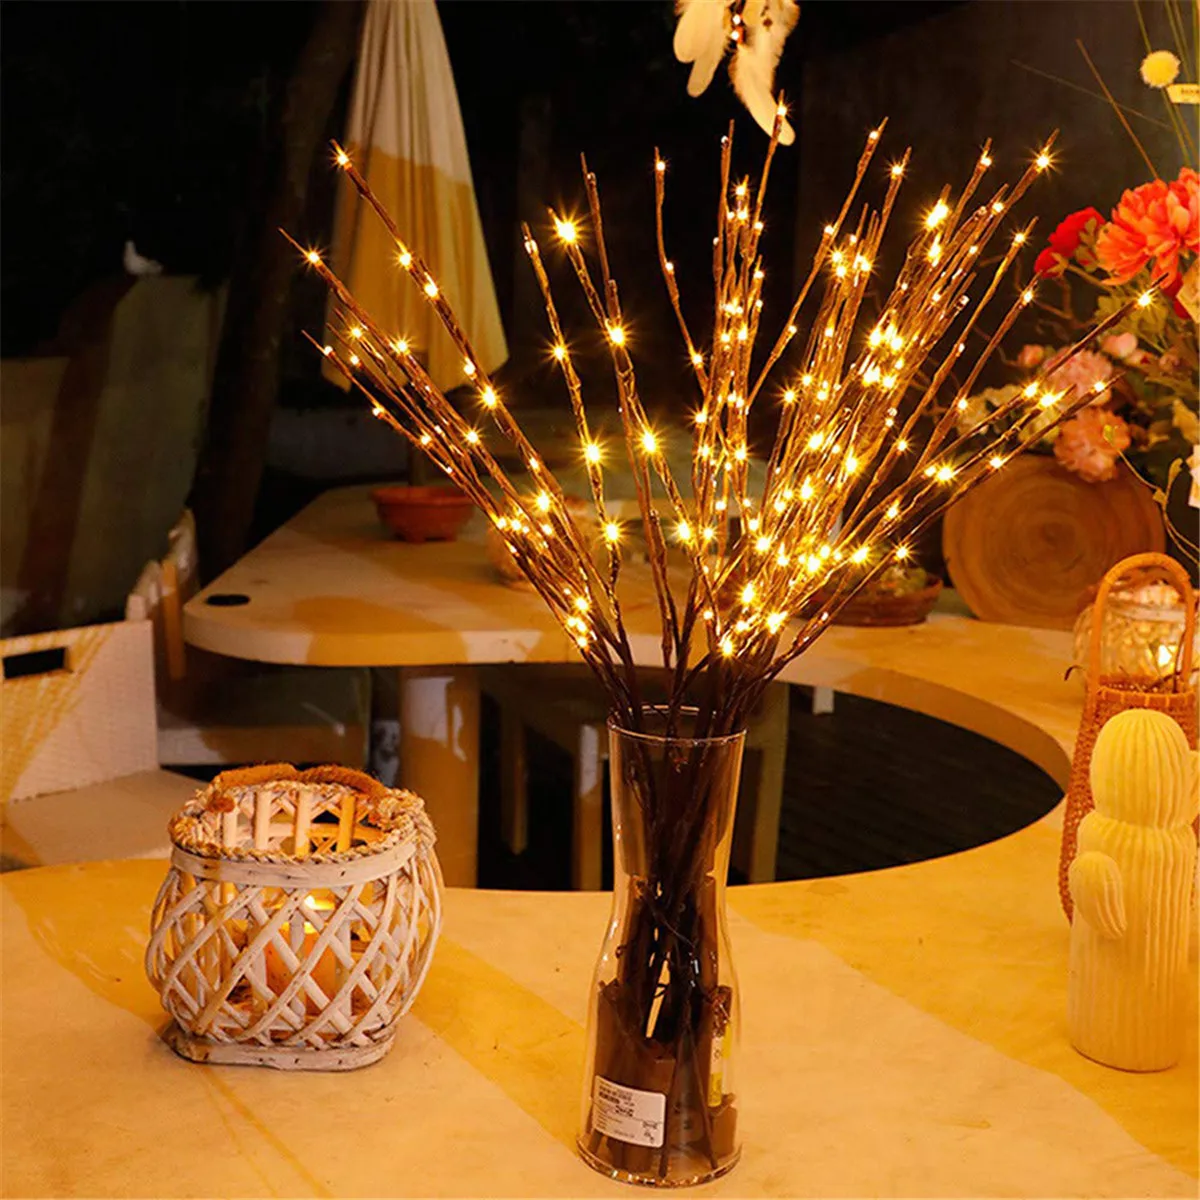 20 Bulbs LED Willow Branch Lights Lamp Natural Tall Vase Filler Willow Tree Branch Christmas Home Wedding Decorative Lights